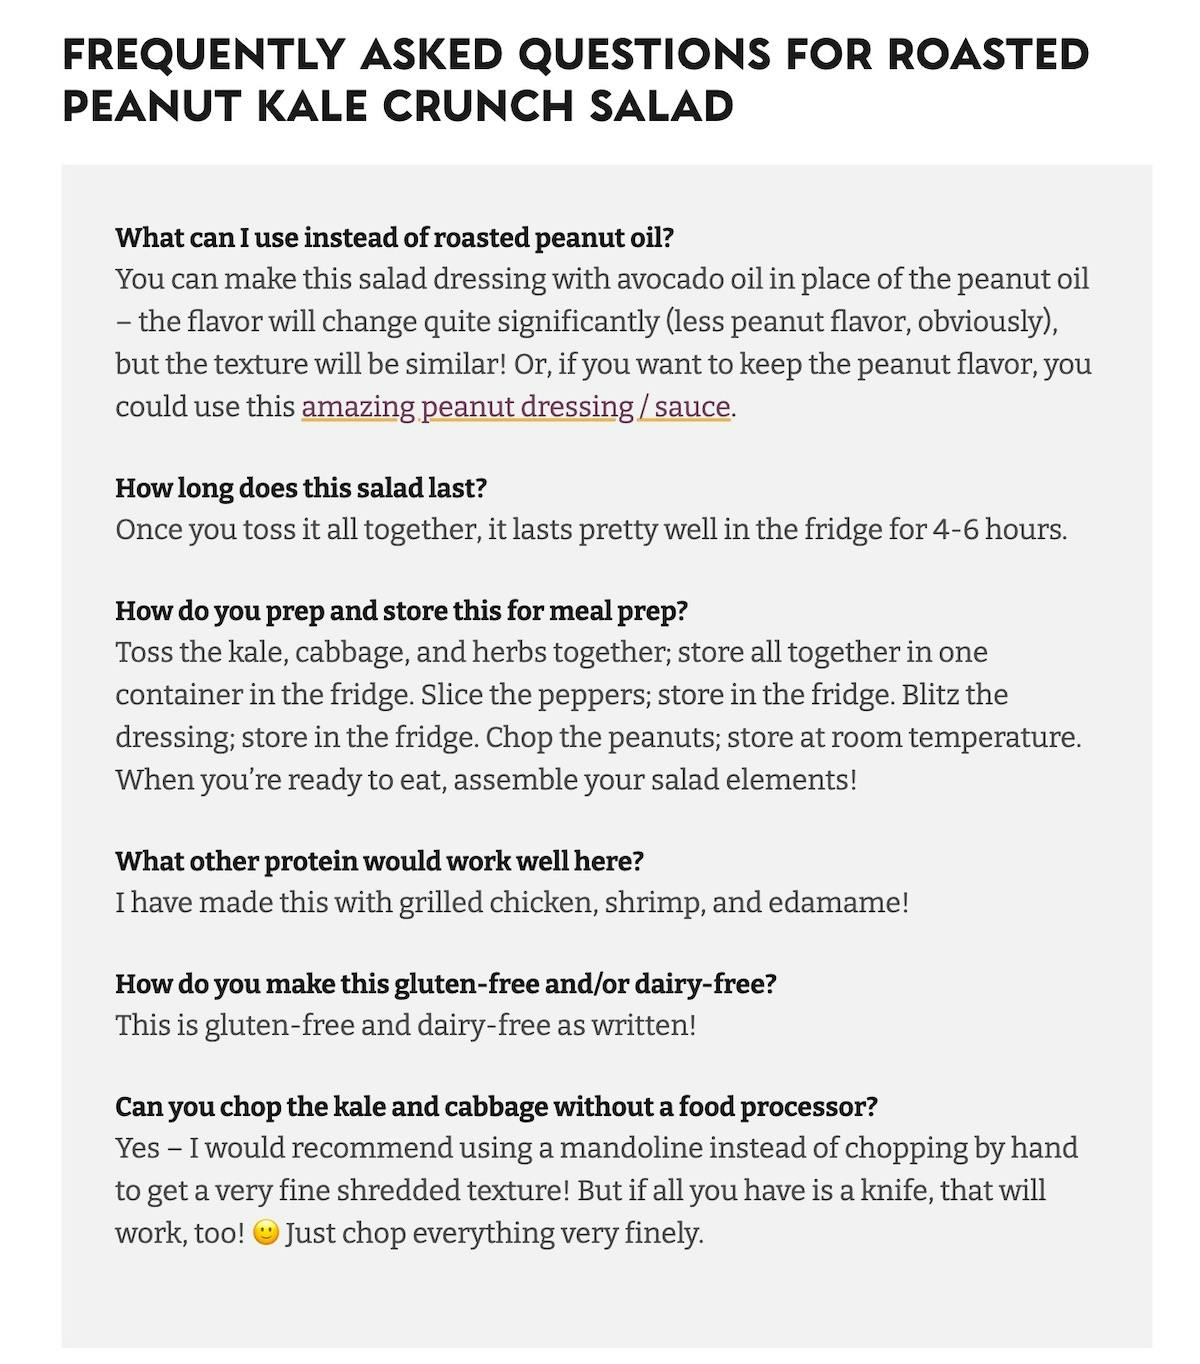 faqs for the roasted peanut kale crunch salad on Pinch of Yum